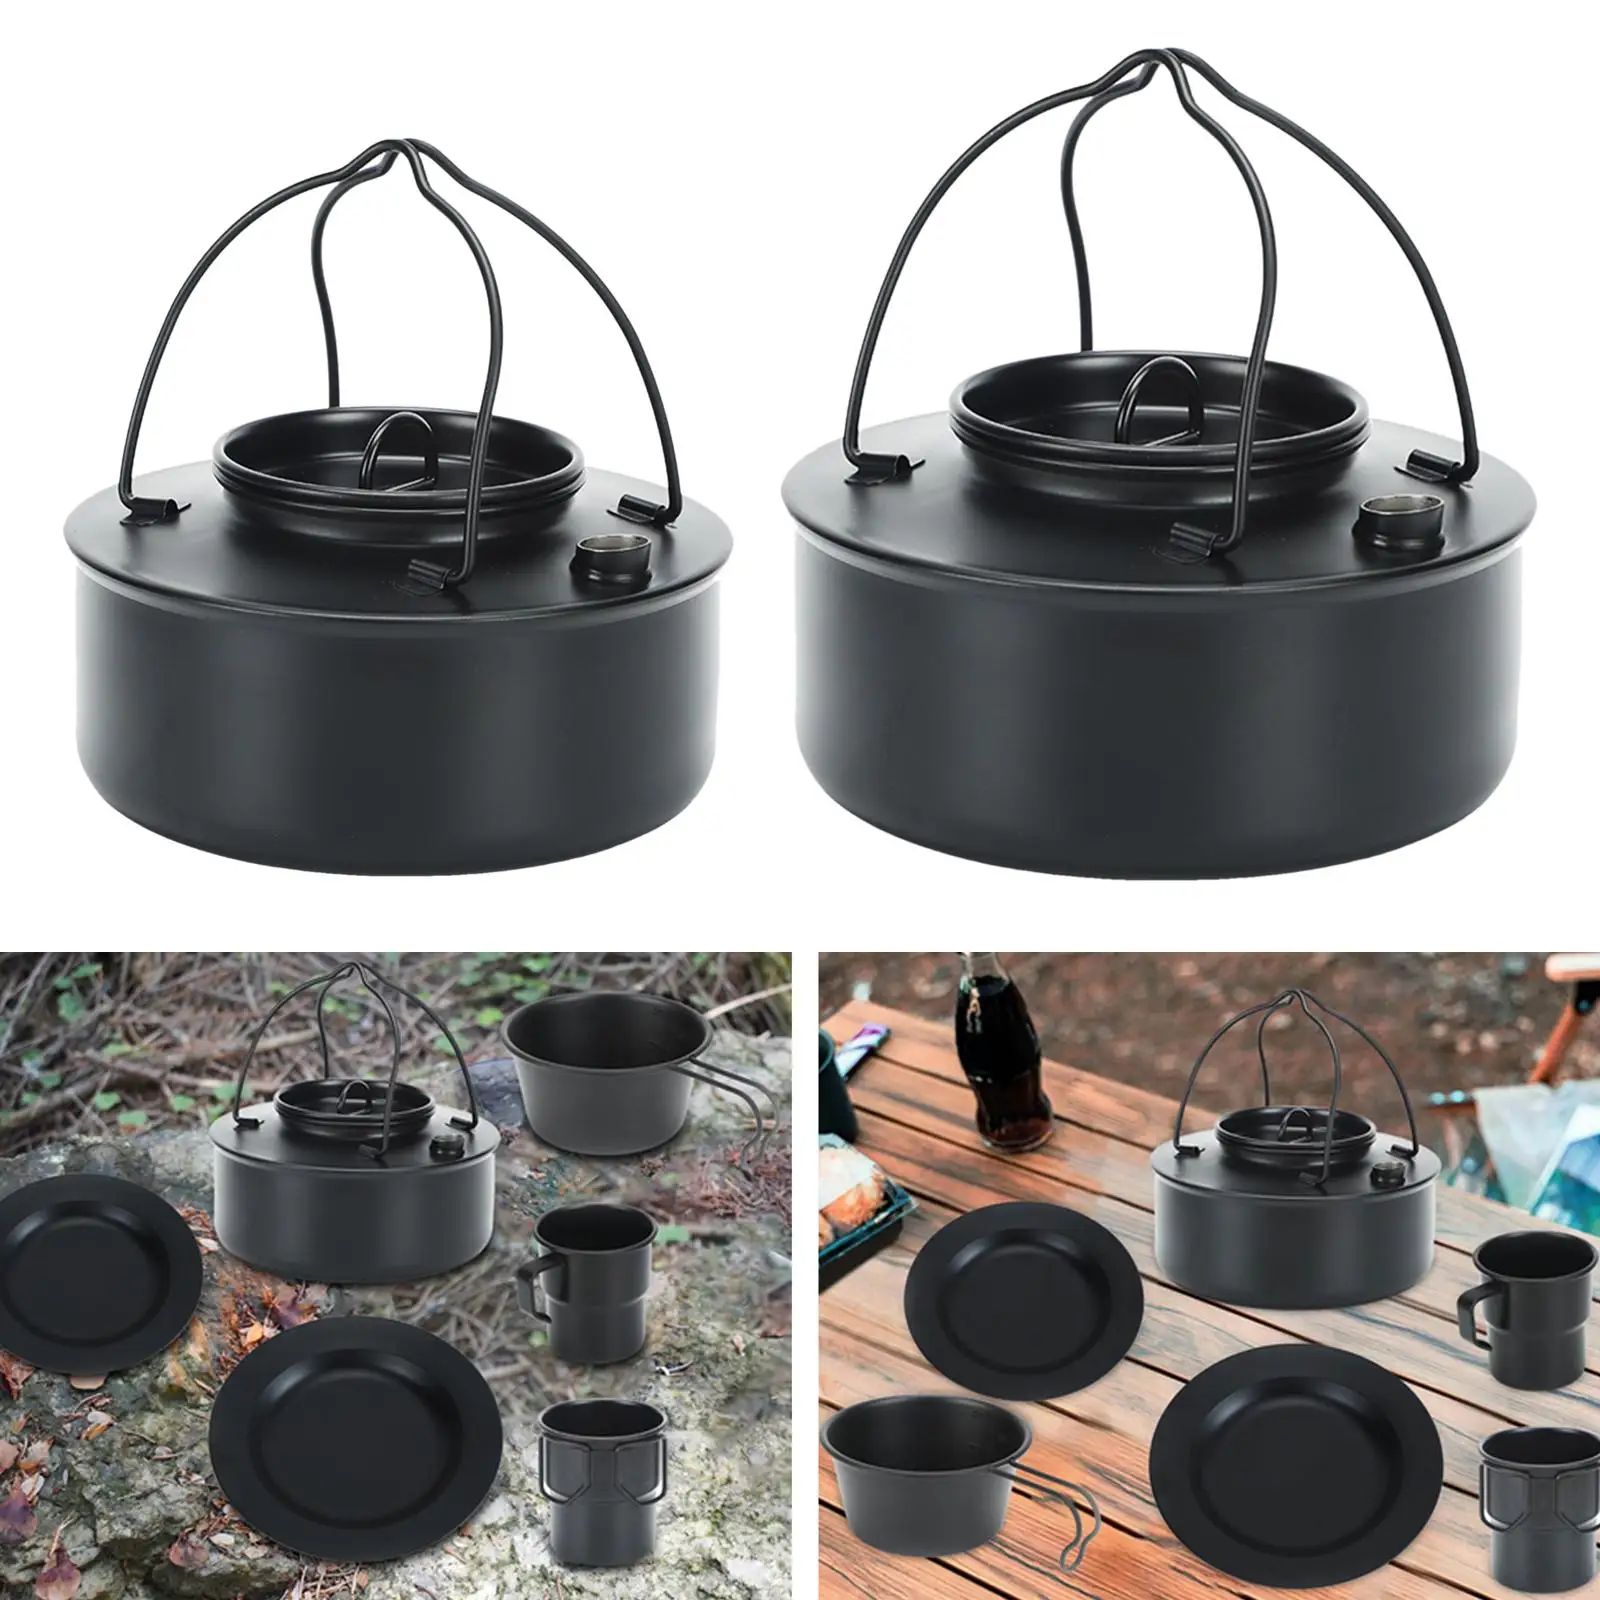 Portable Camping Stovetop Kettle Teapot Teakettle with Handle Campfire Cookware Outdoor Tea Coffee Pot for Fishing Barbecue